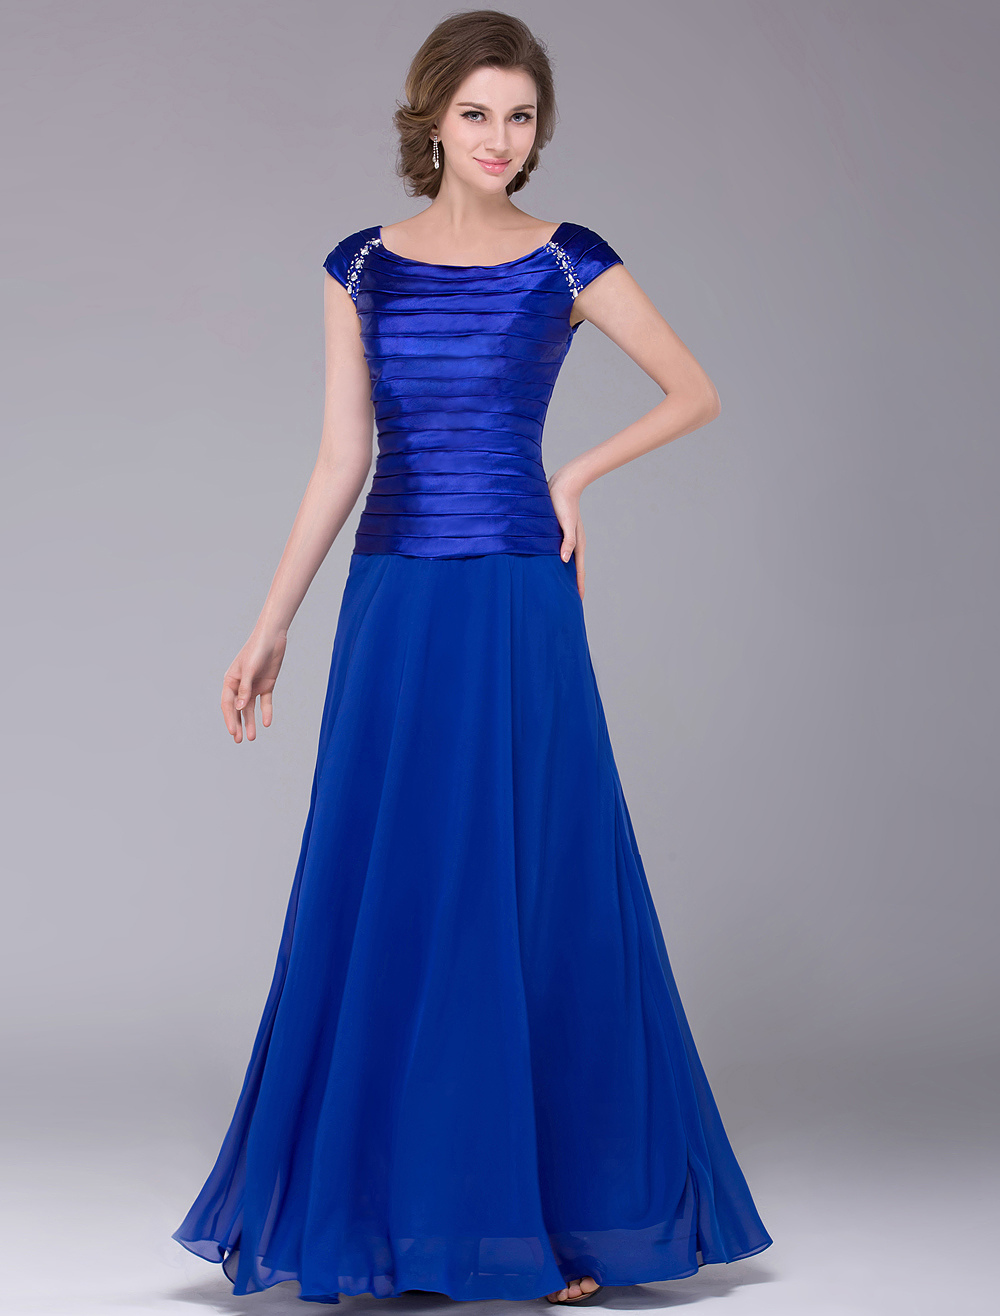 Royal Blue Scoop Neck A-line Chiffon Mother of the Bride Dress (Wedding) photo